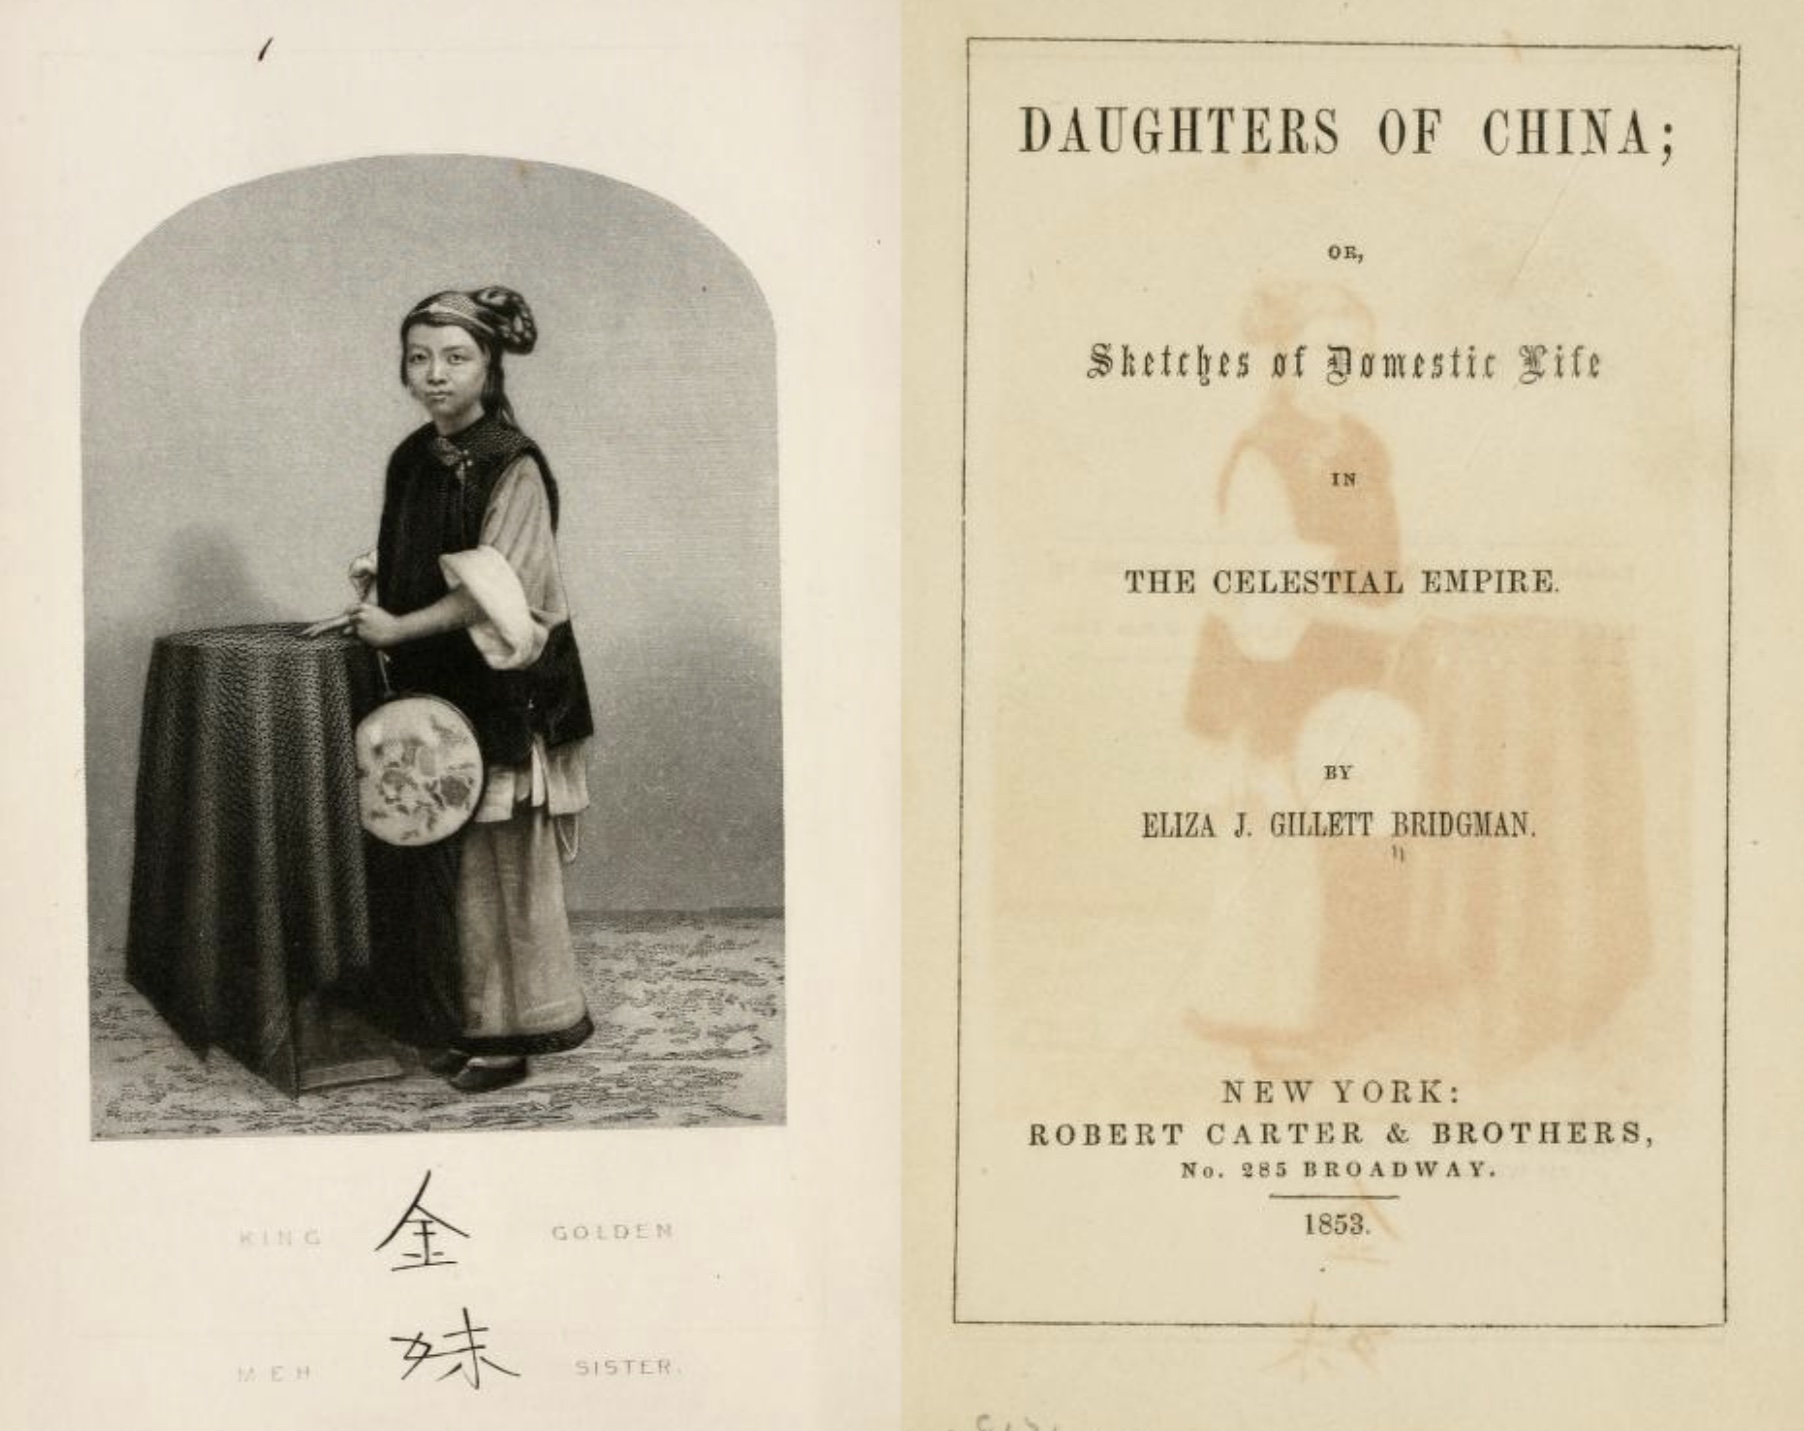 Title page of Gillette Bridgman's 1853 - book "Daughters of China"